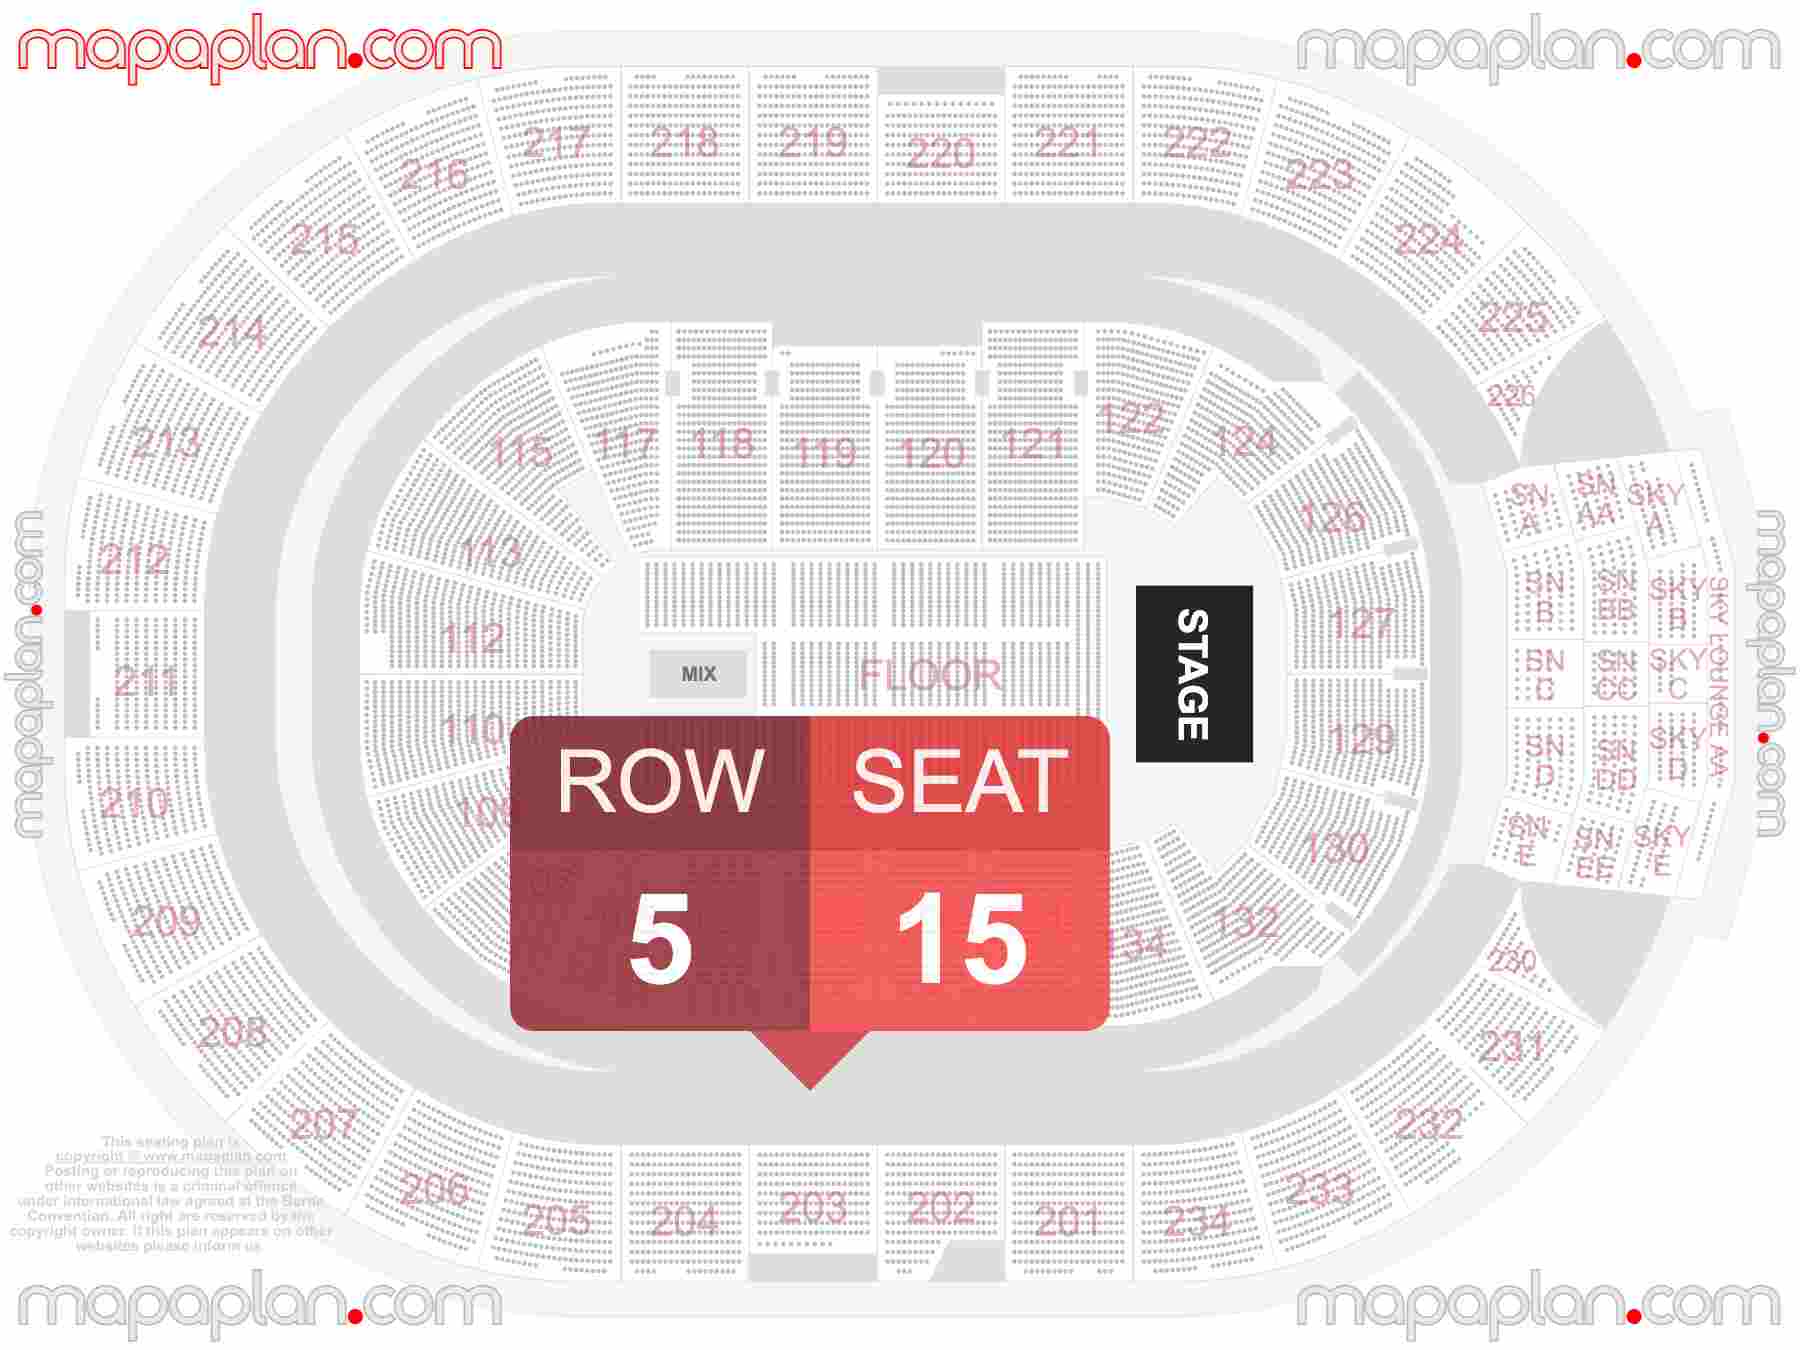 Edmonton Rogers Place seating map Concert detailed seat numbers and row numbering map with interactive map chart layout